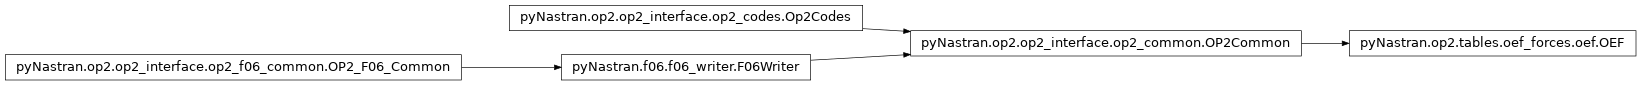 Inheritance diagram of pyNastran.op2.tables.oef_forces.oef